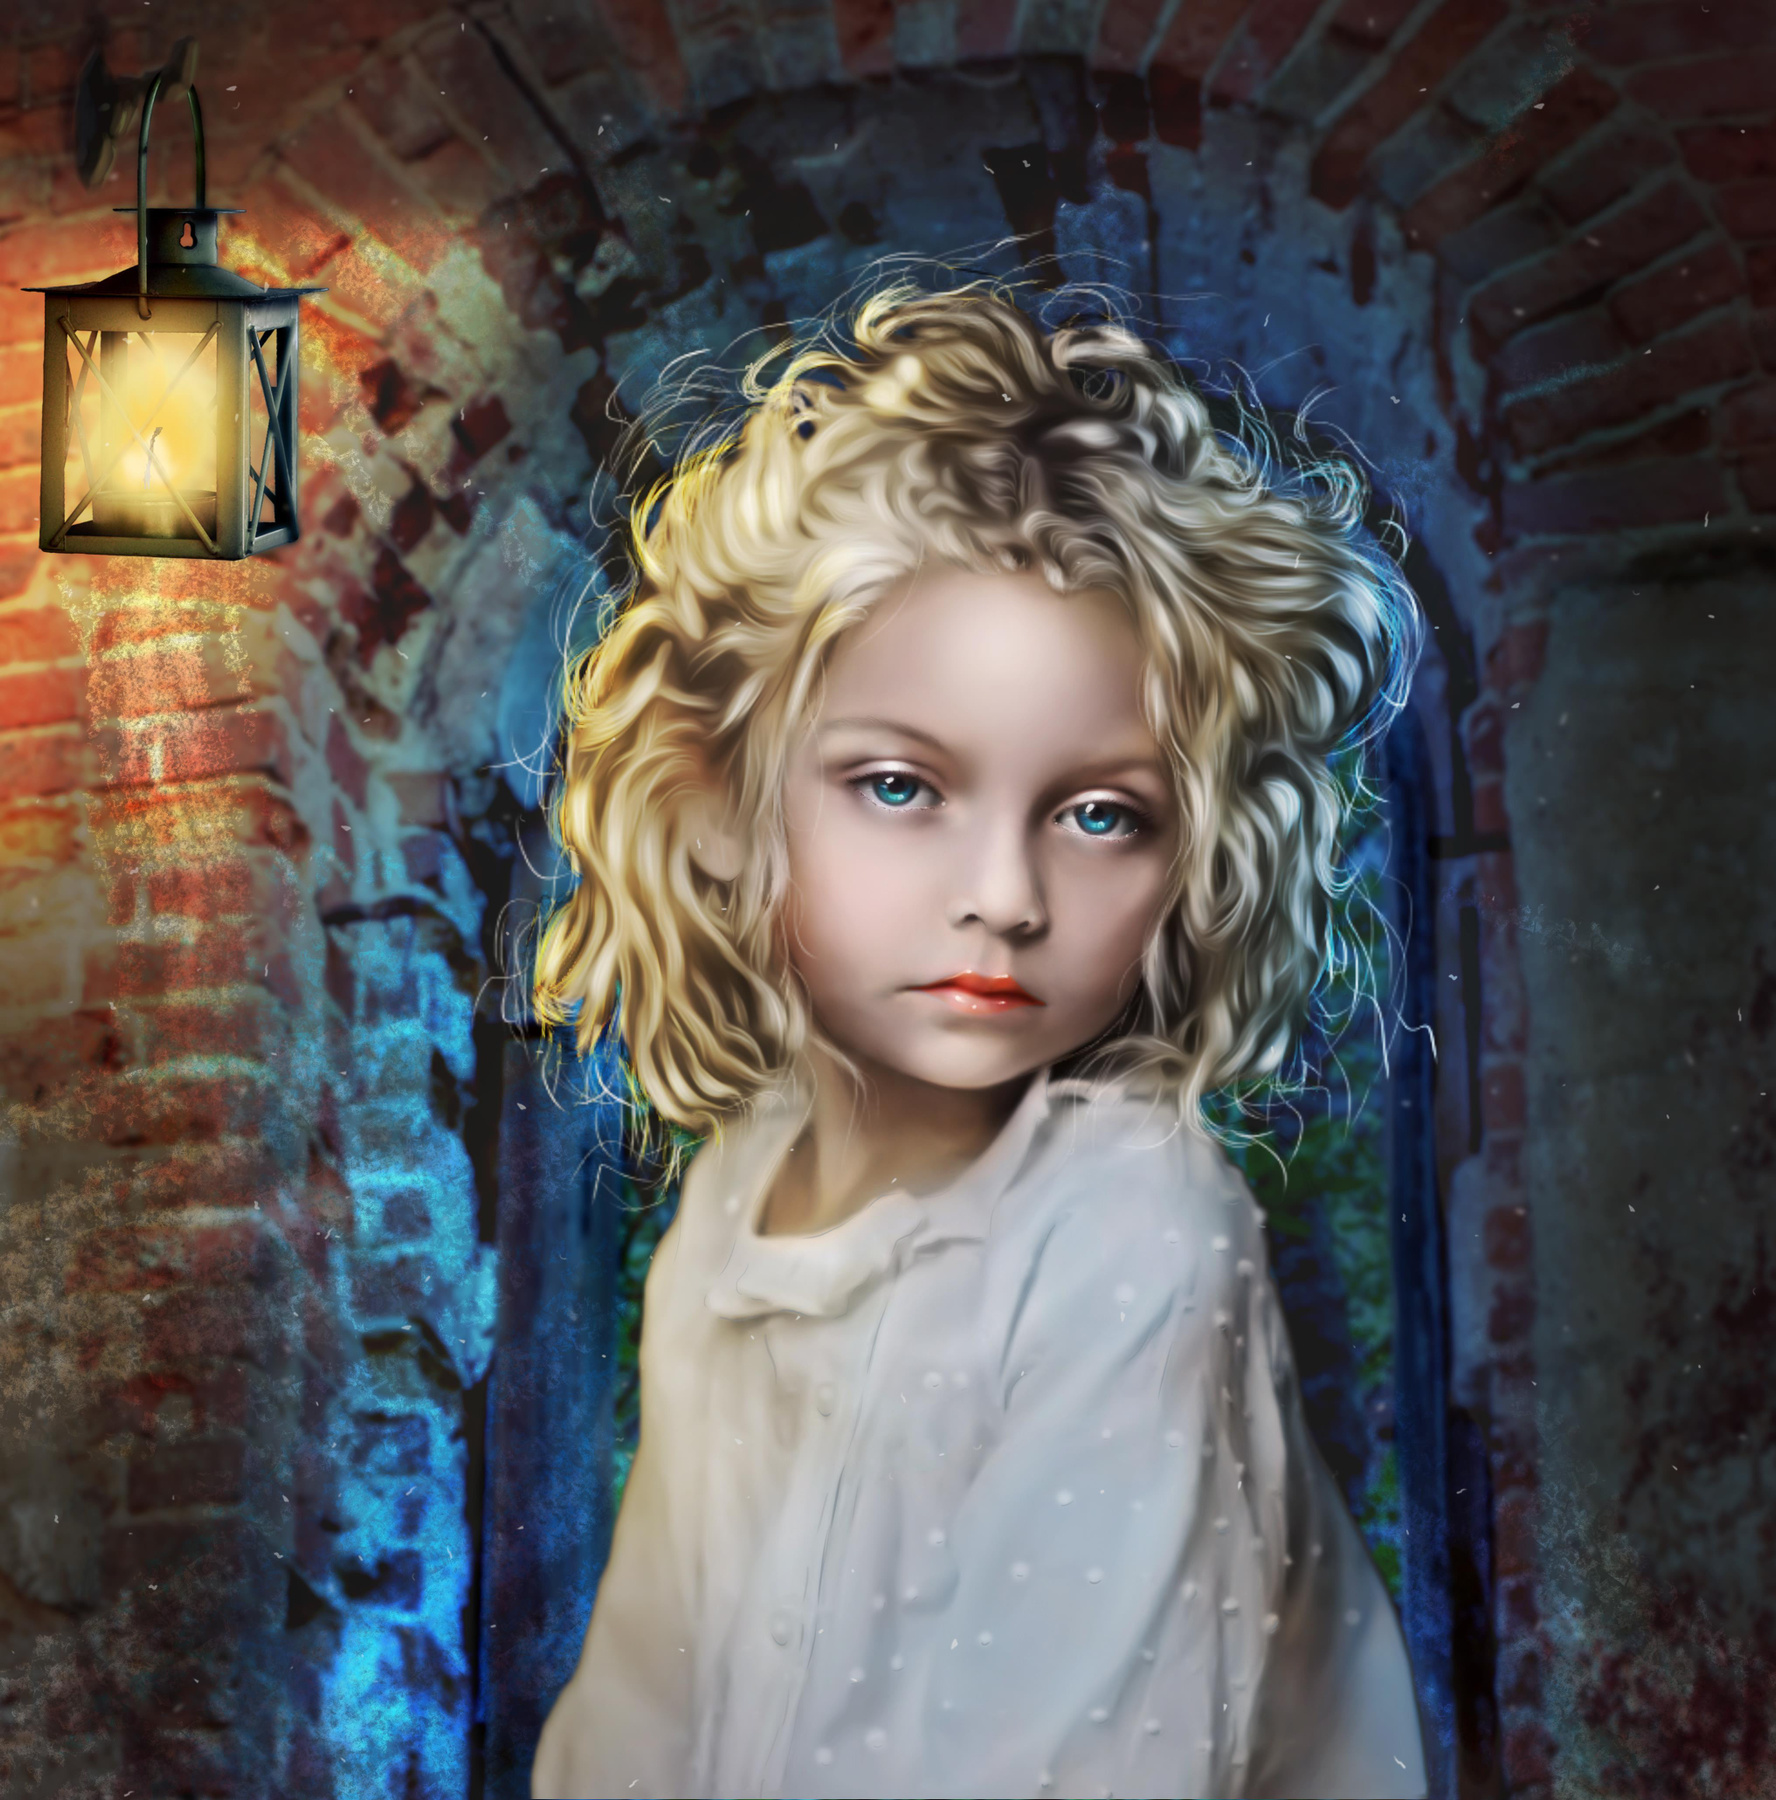 A little girl in a nightgown under a kerosene lamp in an old castle. magic curly night burning child illustration light cute dress girl little fantasy imagination drawing candid childhood carefree fear loneliness mystery privacy solitude teenager funny terrified twilight fairy tale dark vibrant color lamp castle old